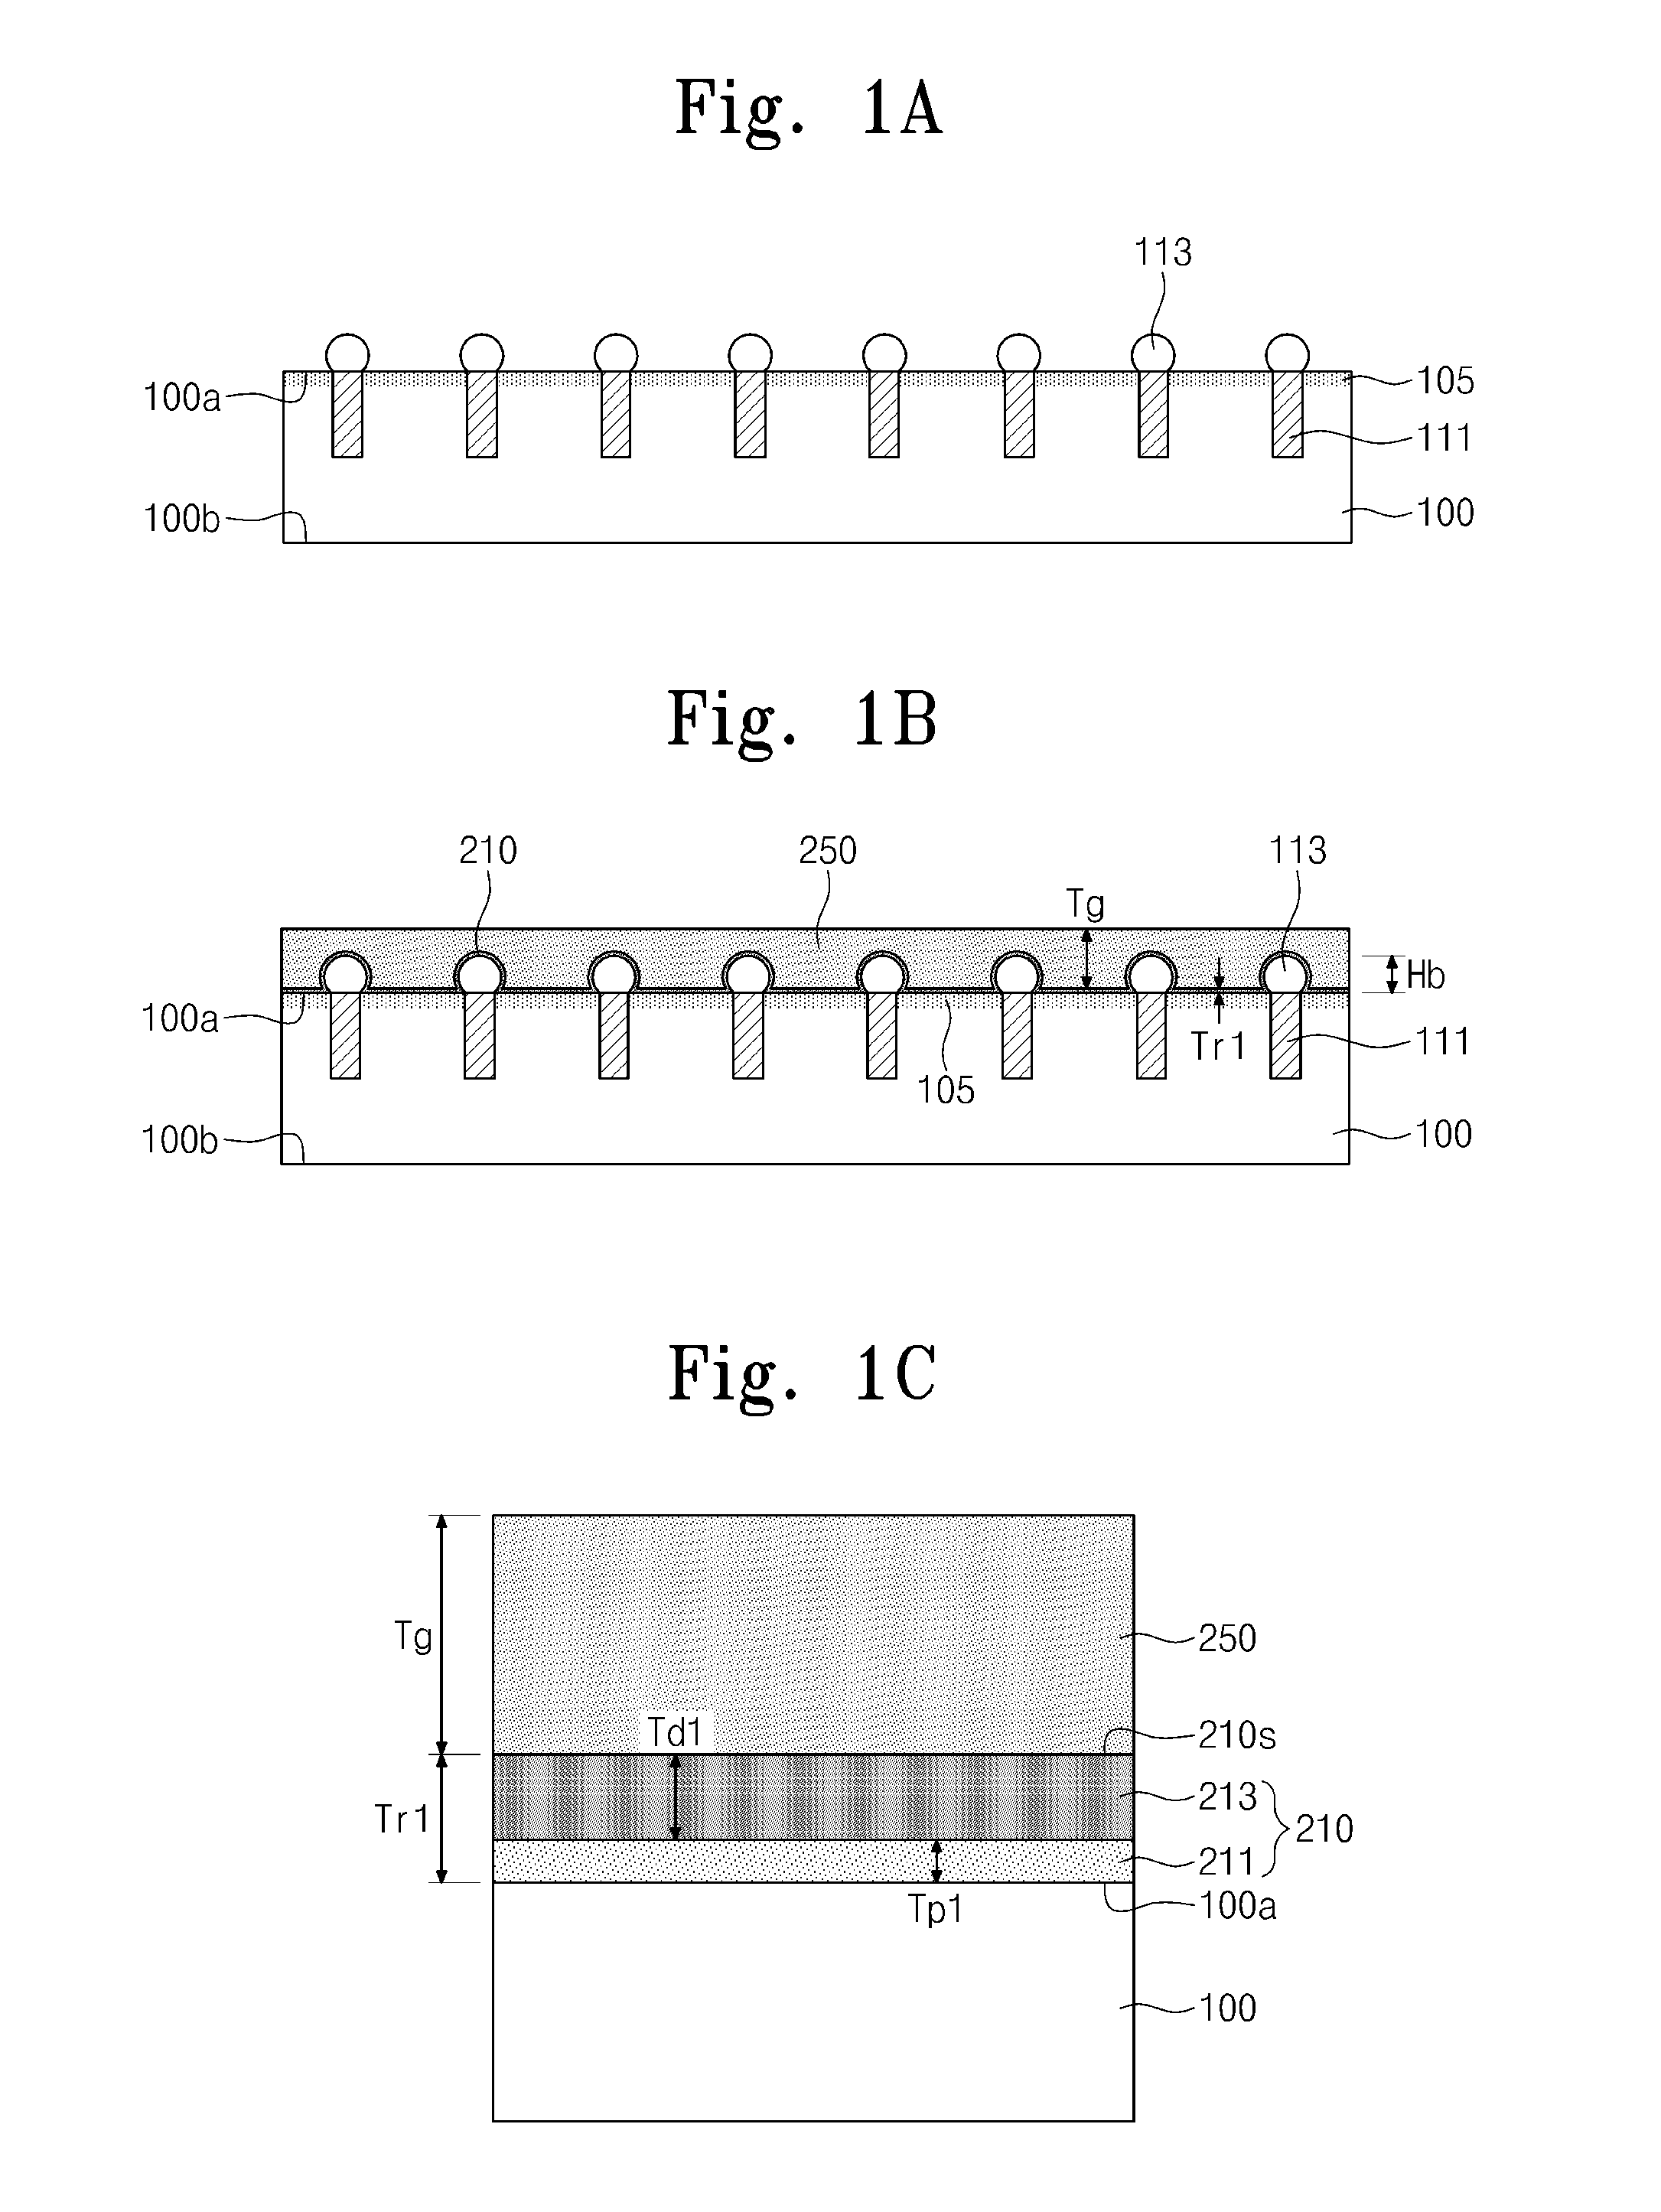 Methods of processing substrates